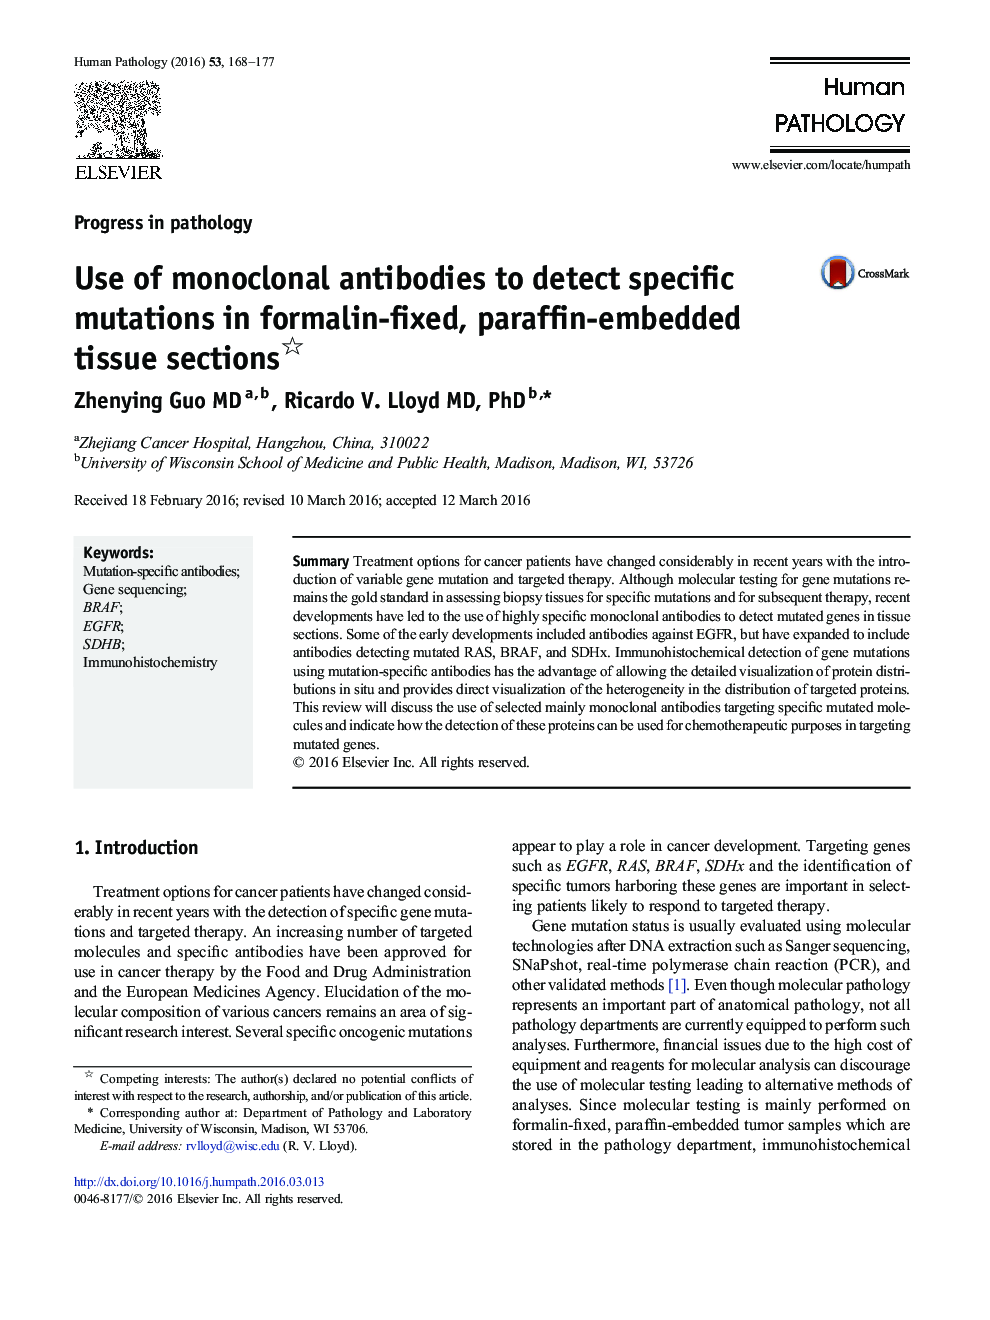 Use of monoclonal antibodies to detect specific mutations in formalin-fixed, paraffin-embedded tissue sections 